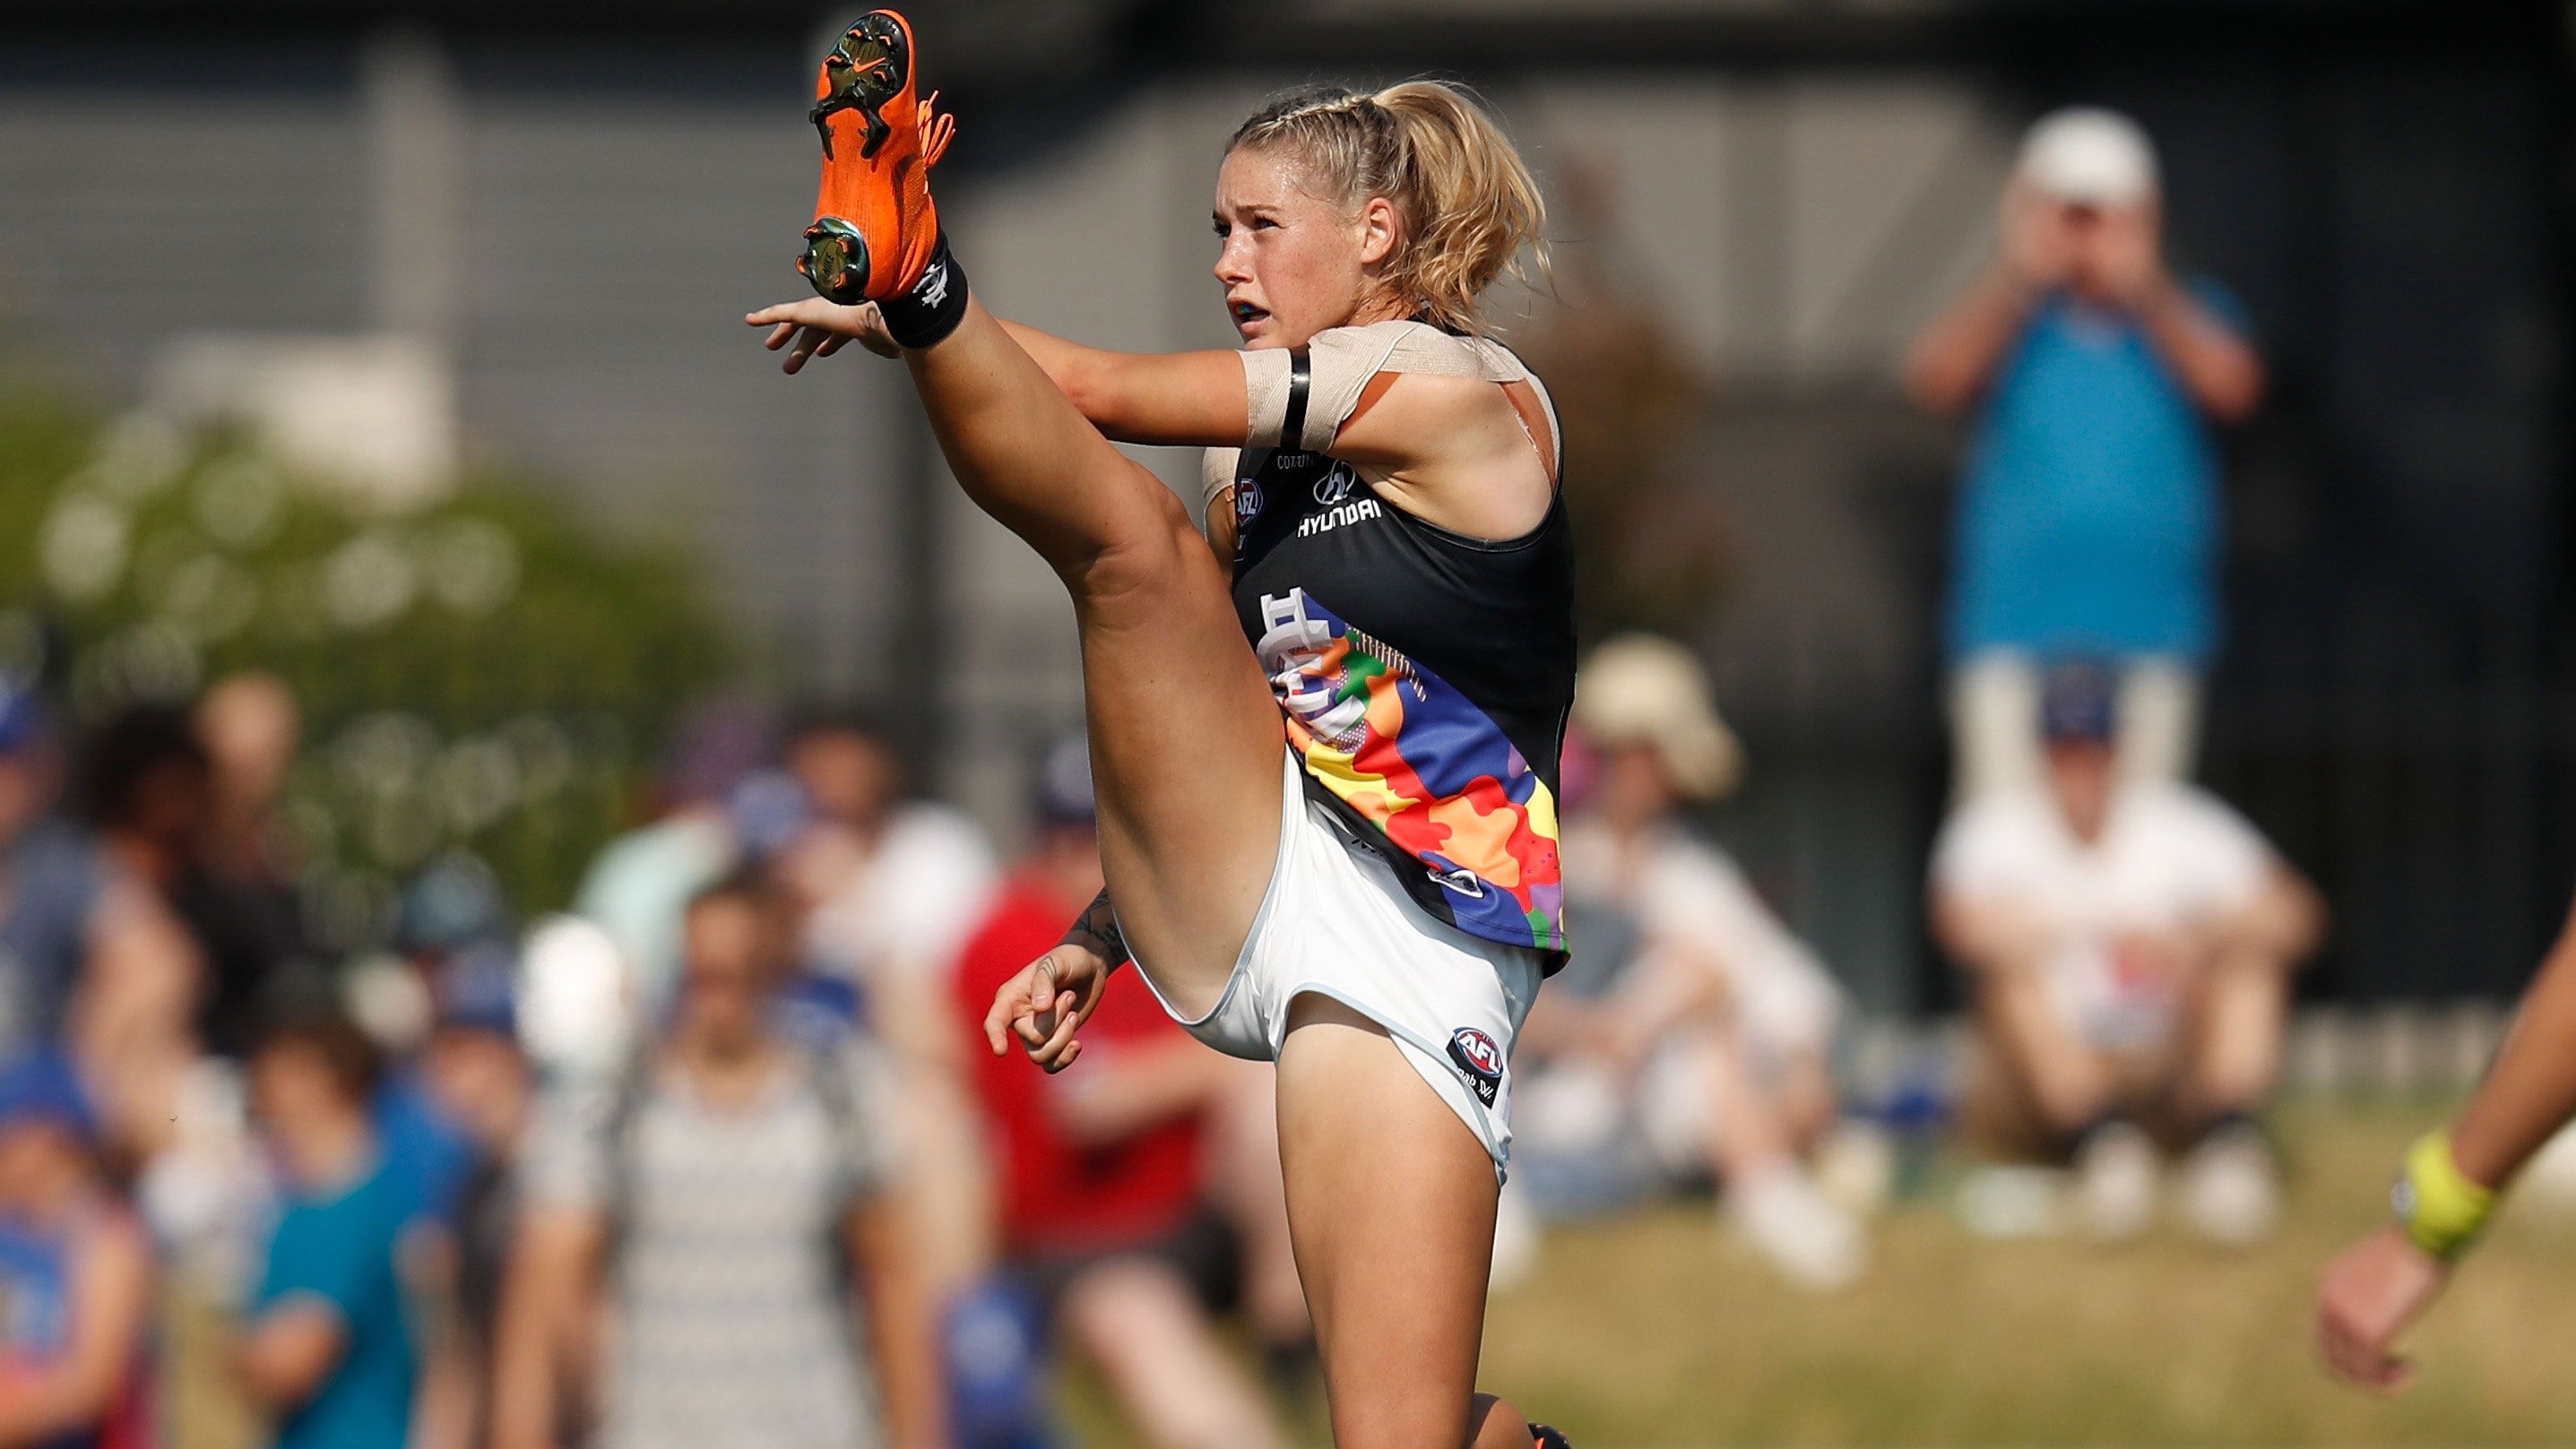 The photo that made Tayla Harris a household name.